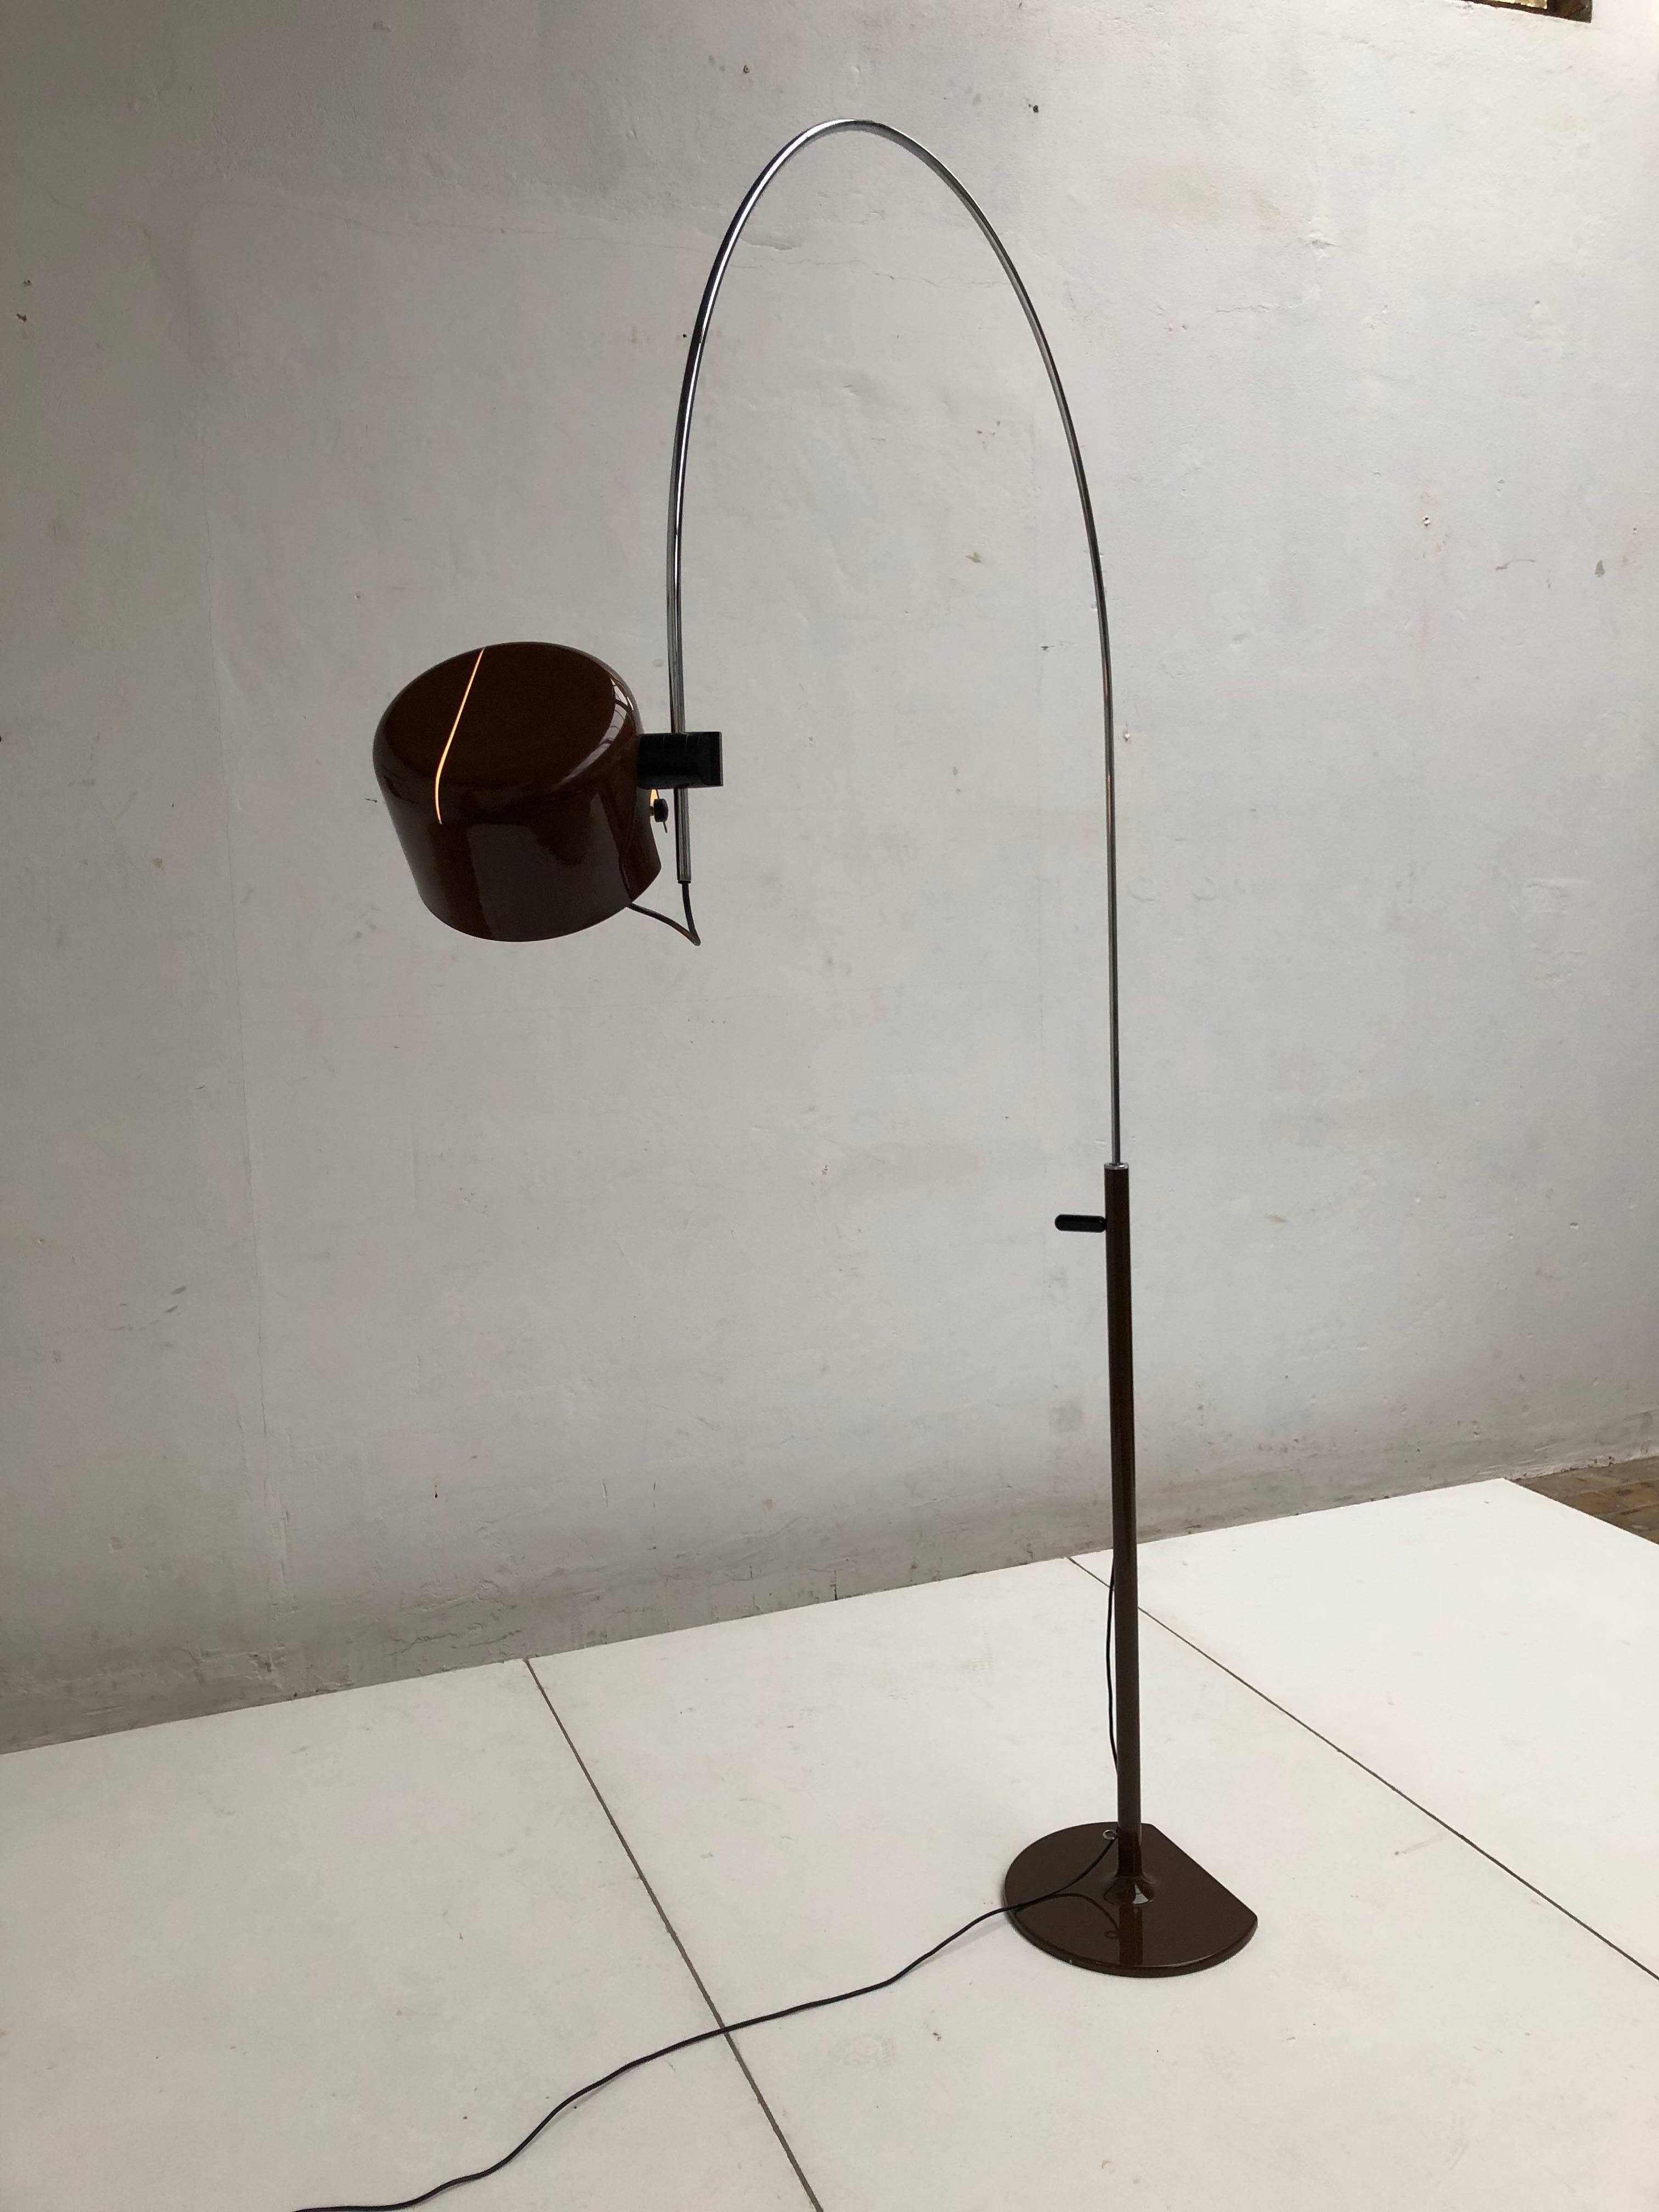 Aluminum Joe Colombo Extra Large Arched Coupe Floor Lamp by O-Luce, 1970 Production